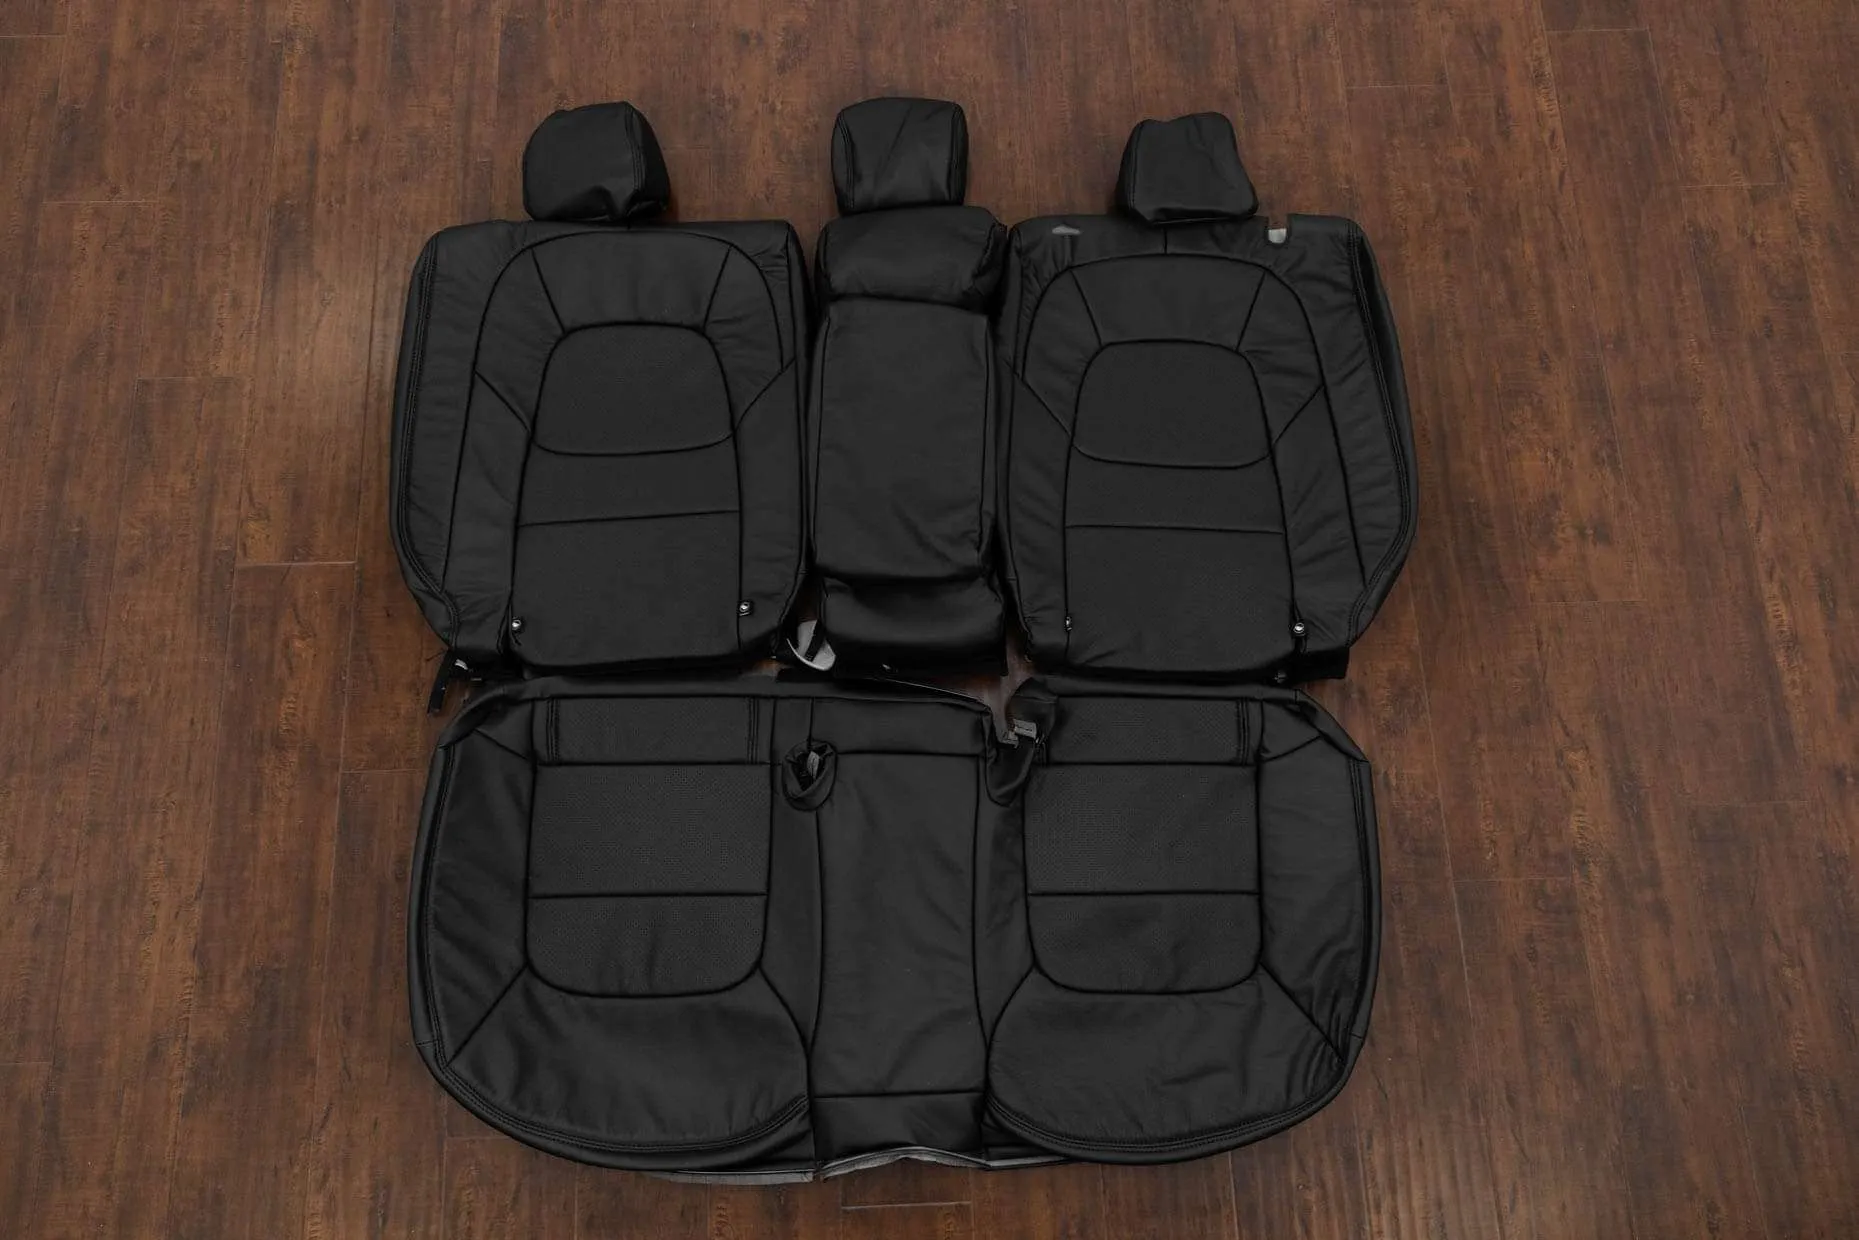 Mazda CX-5 Leather Seat Kit - Black - Rear seat upholstery with Armrest